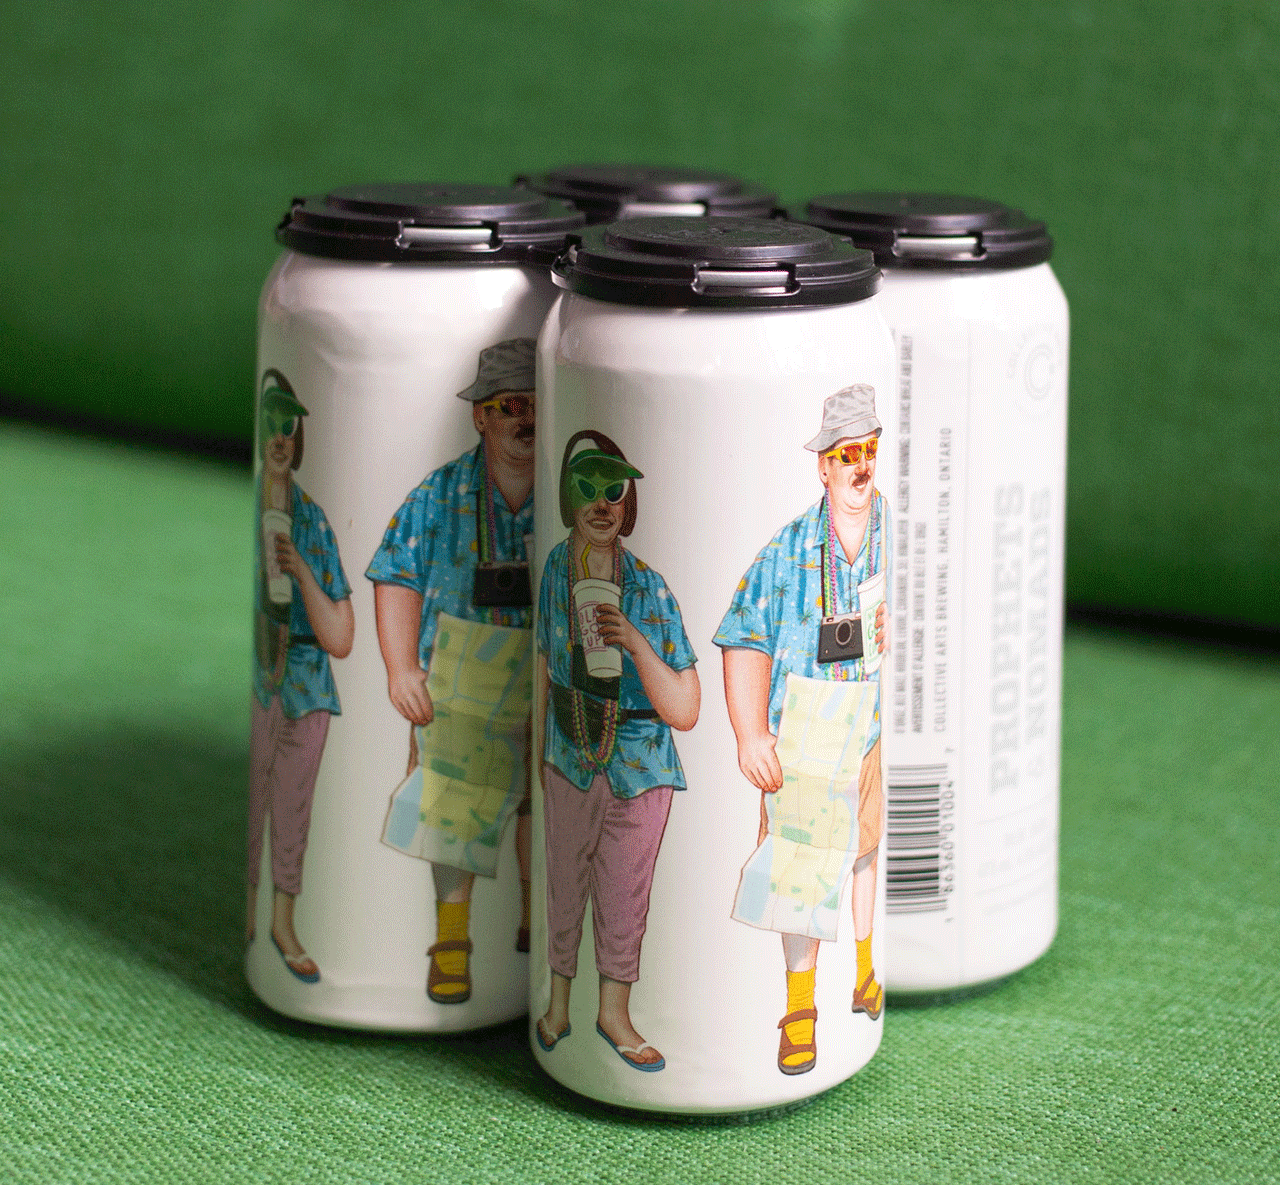 Jason Raish, Beer can packaging design featuring American tourists